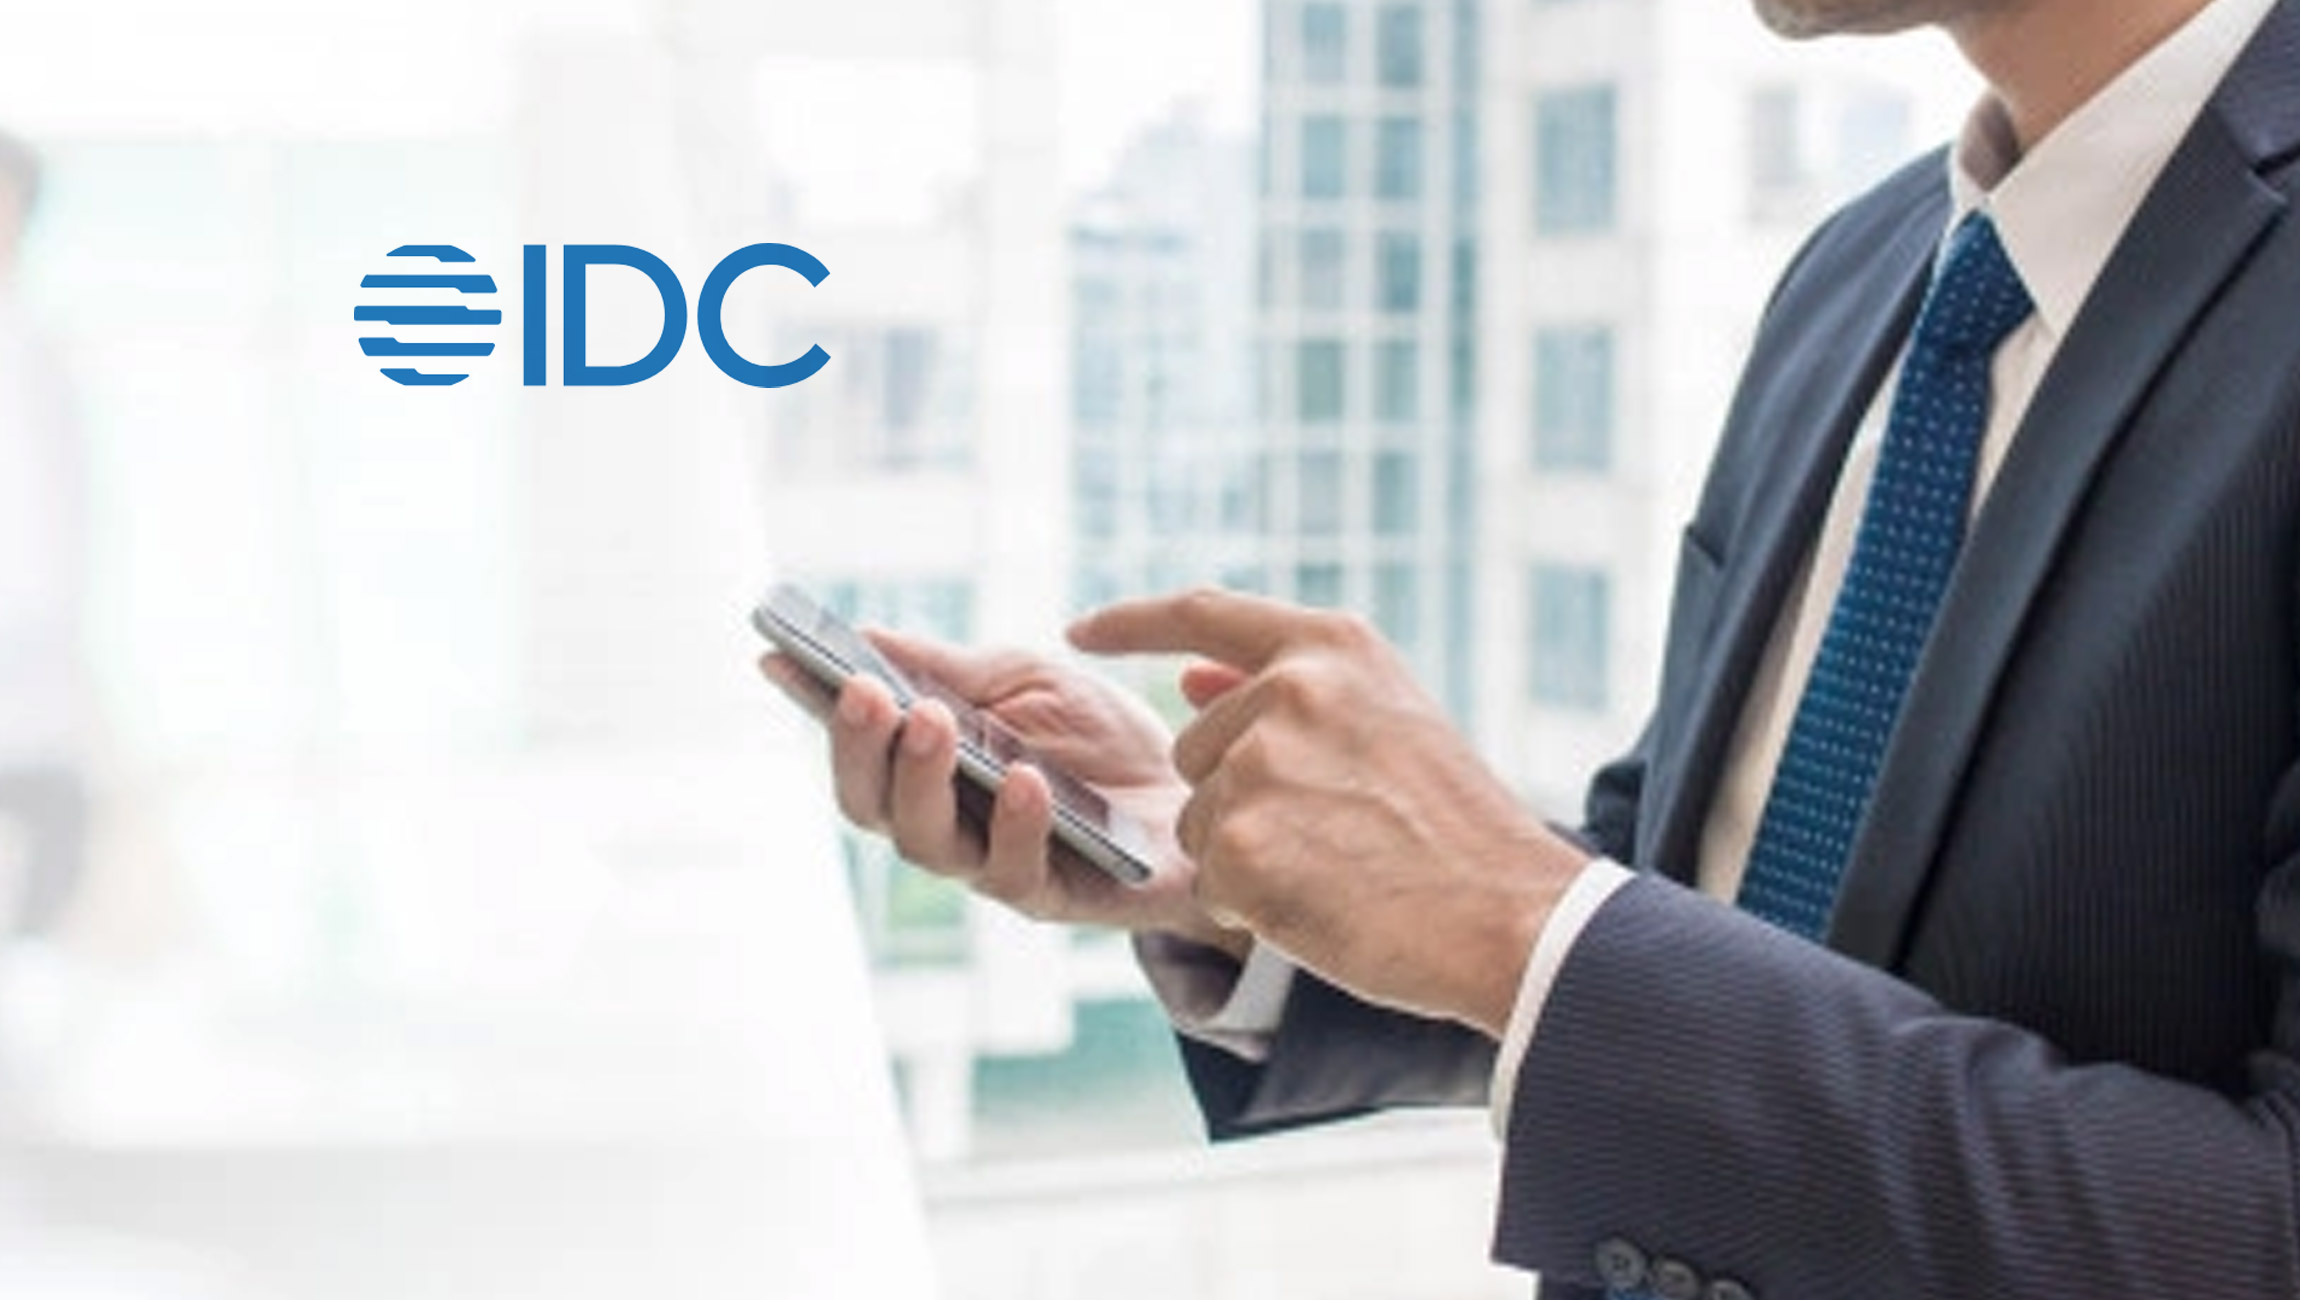 IDC-Survey-Shows-That-Managed-Service-Providers-Face-Numerous-Challenges-in-the-Evolving-and-Highly-Competitive-Managed-Cloud-Services-Market